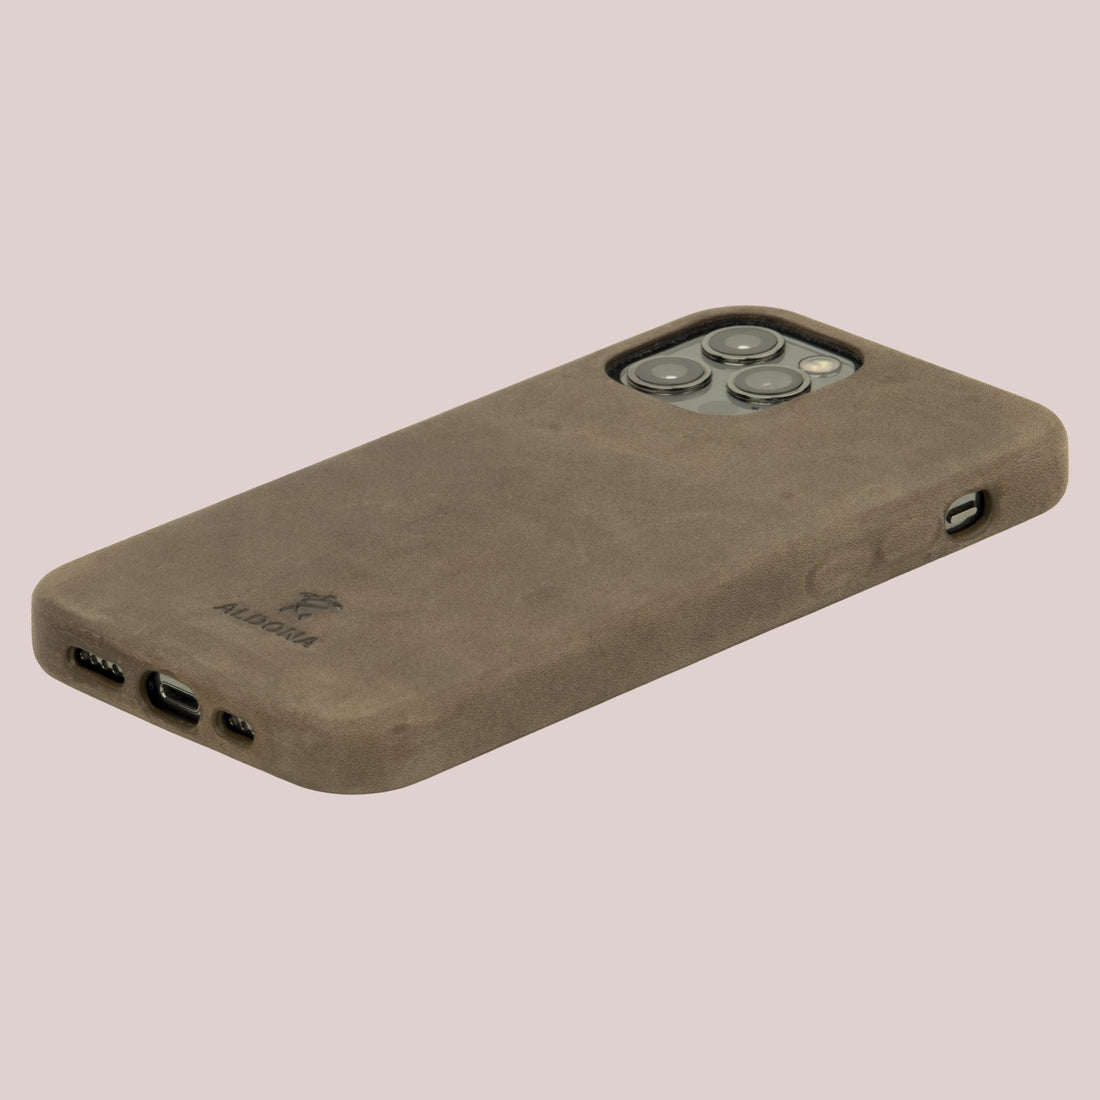 Kalon Case for iPhone 14 Plus with MagSafe Compatibility - Cognac